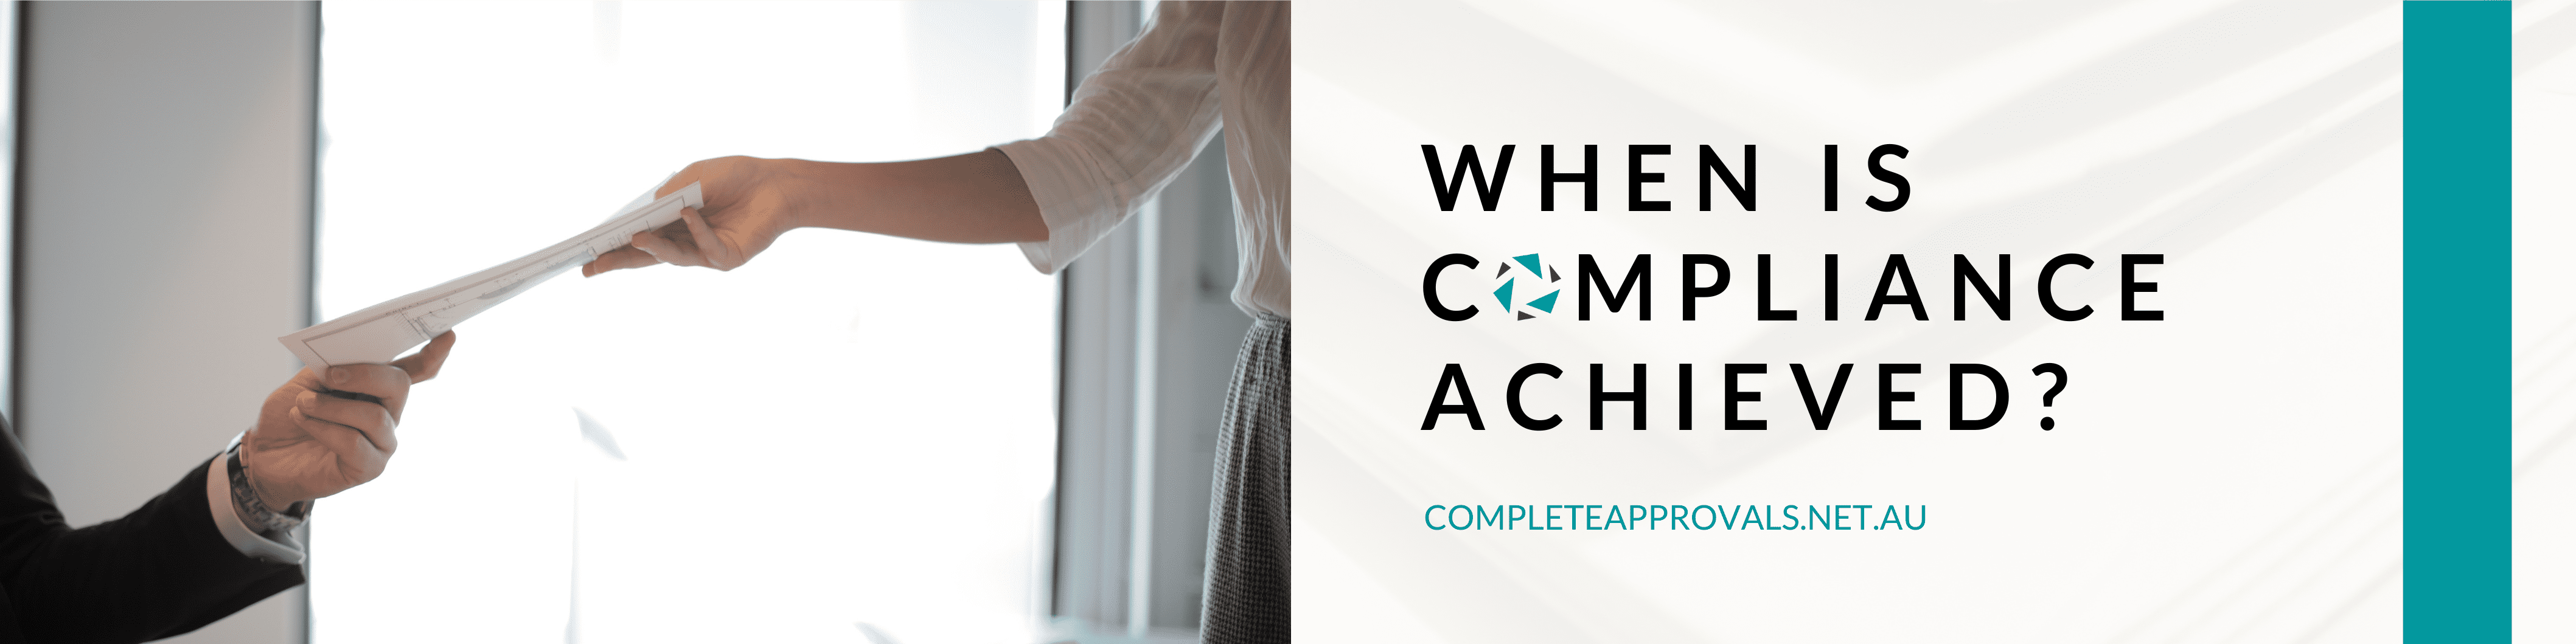 When is Compliance Achieved? Complete Approvals